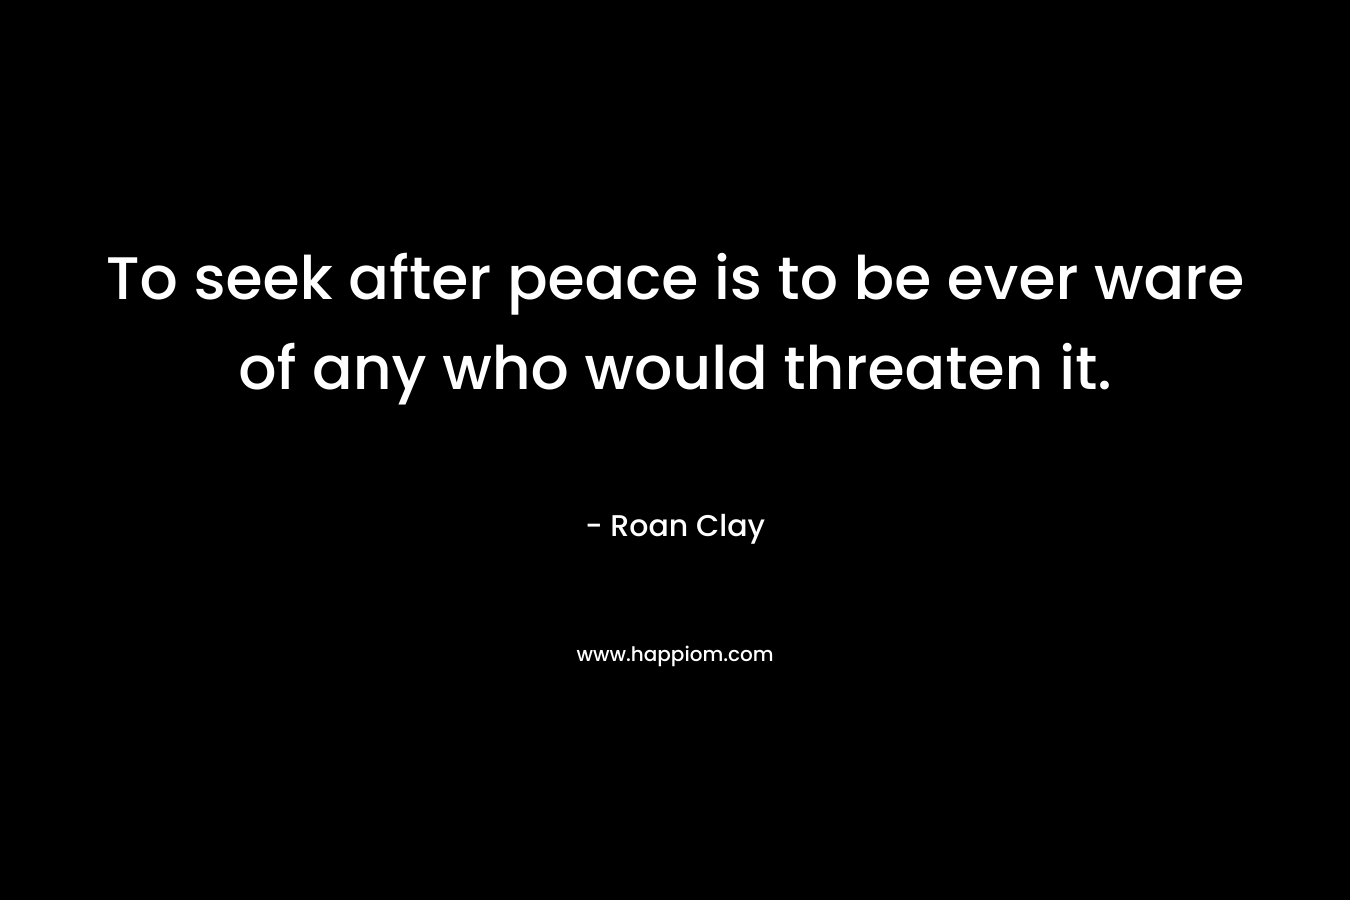 To seek after peace is to be ever ware of any who would threaten it.